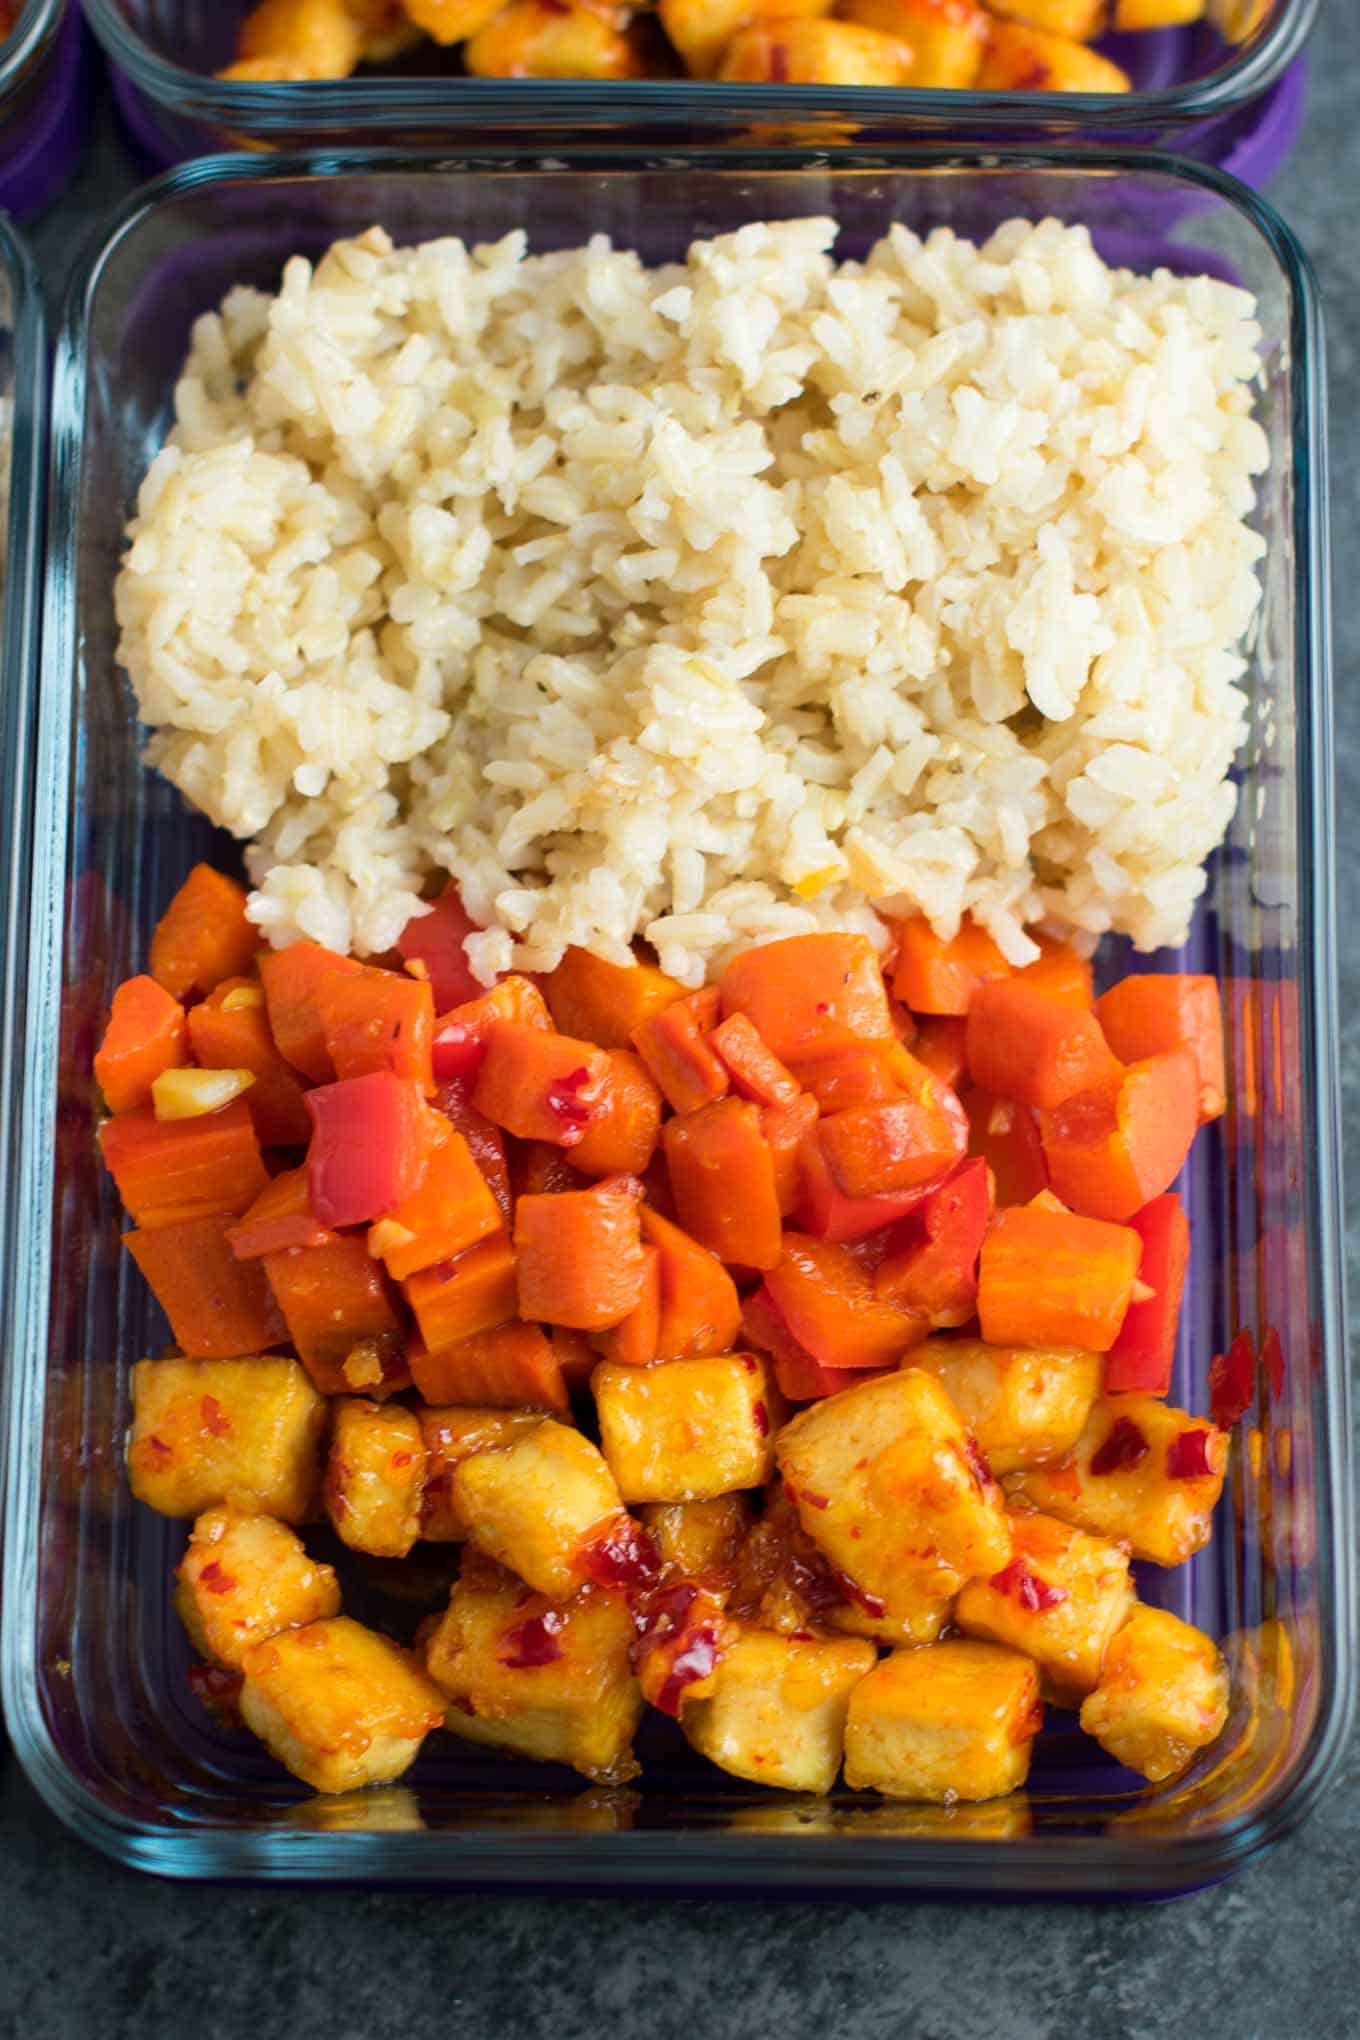 Meal Prep Sweet Chili Tofu Bowls with brown rice and vegetables. A delicious vegan or vegetarian meal! #vegan #vegetarian #veganmealprep #tofu